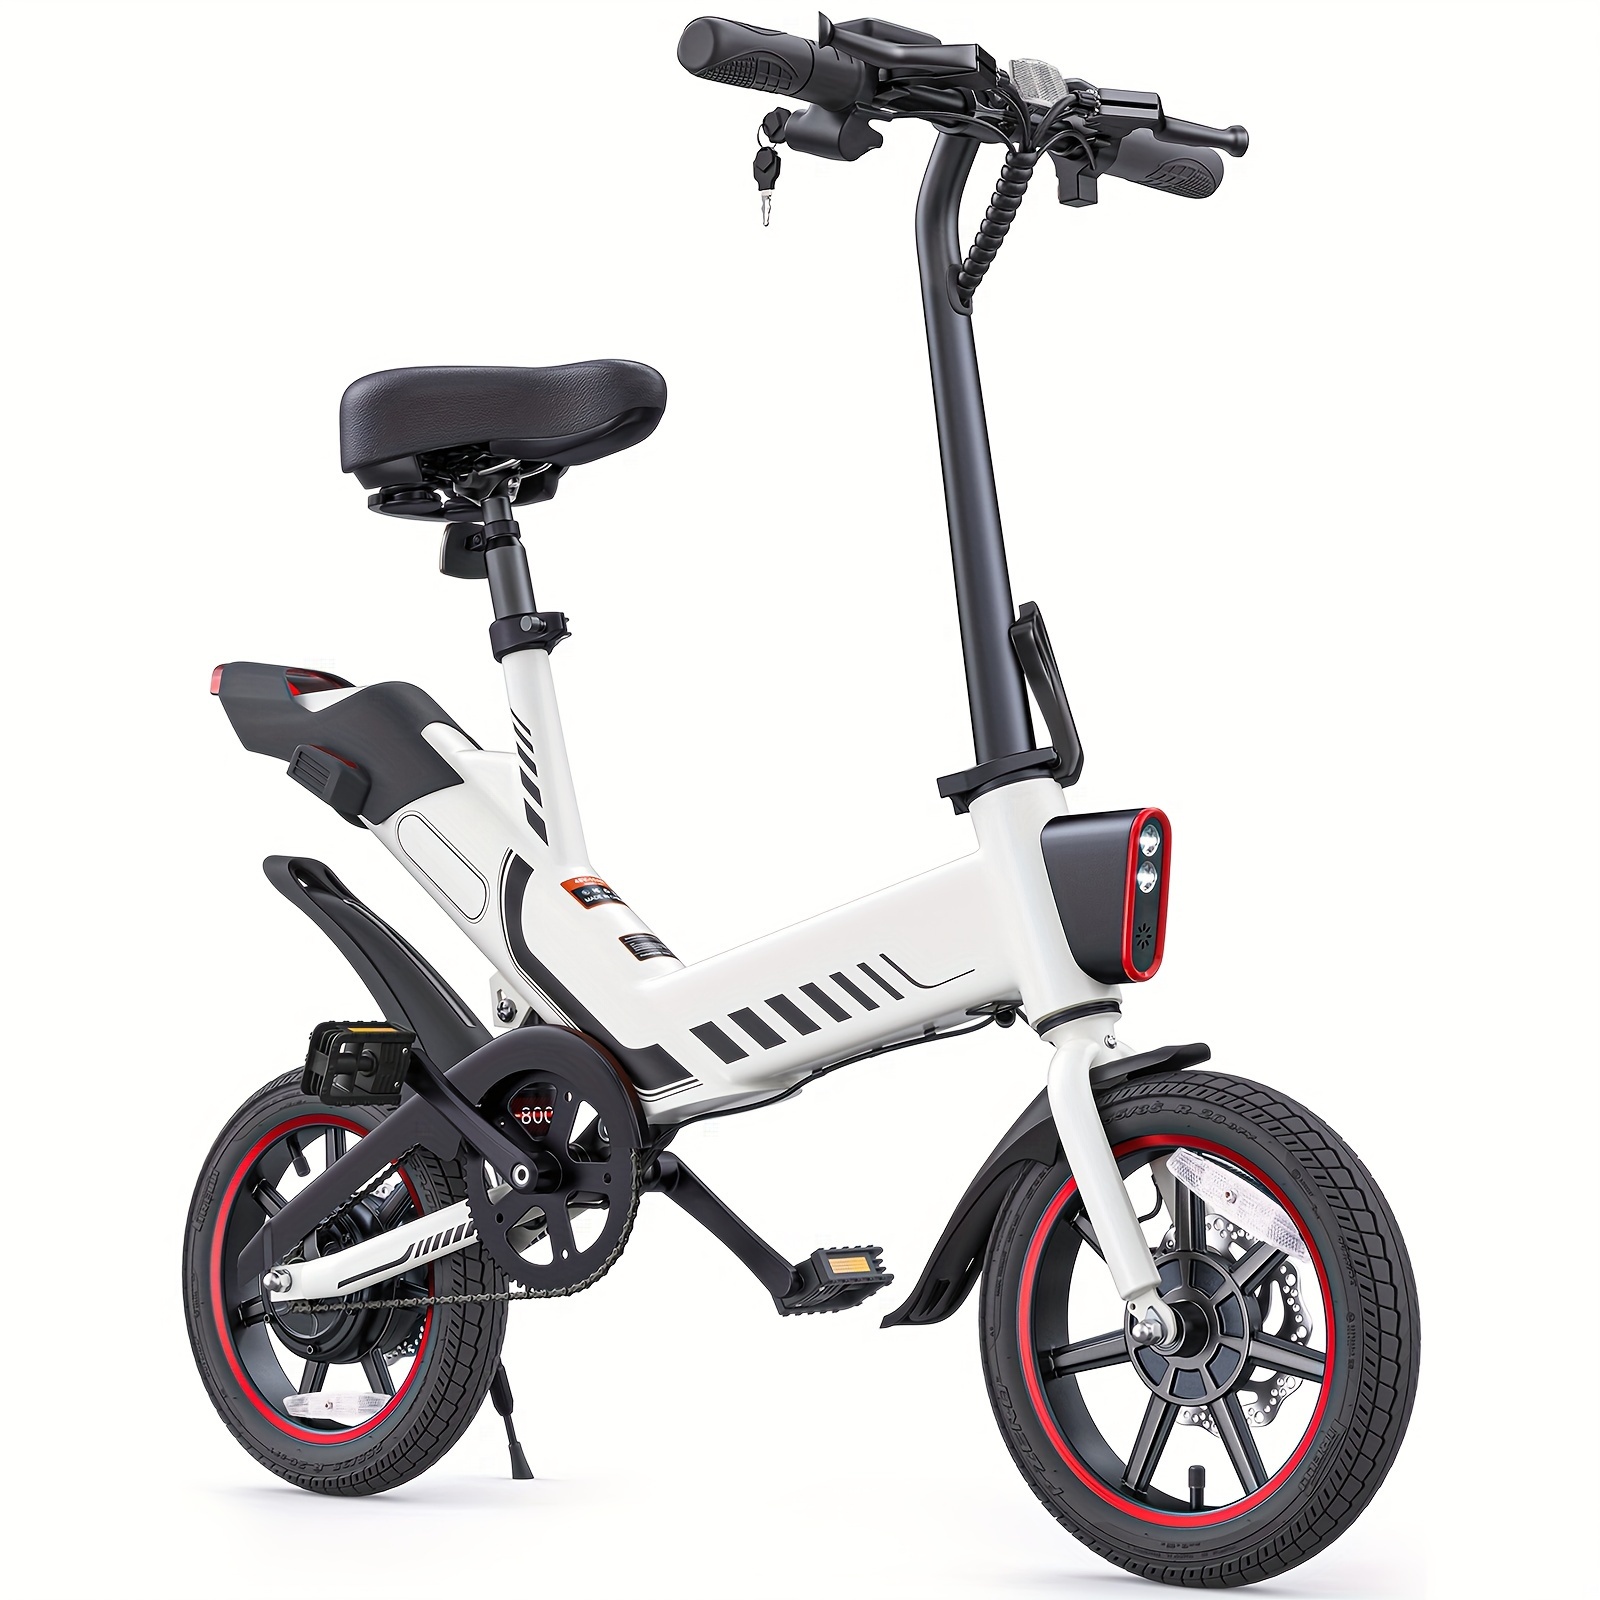 

14'' Electric Bike For Adults, Electric Bicycle For Teenagers Ebike With 18.6mph Folding Electric Bike With 36v/374wh Battery Throttle & Pedal Assist, City Commuter